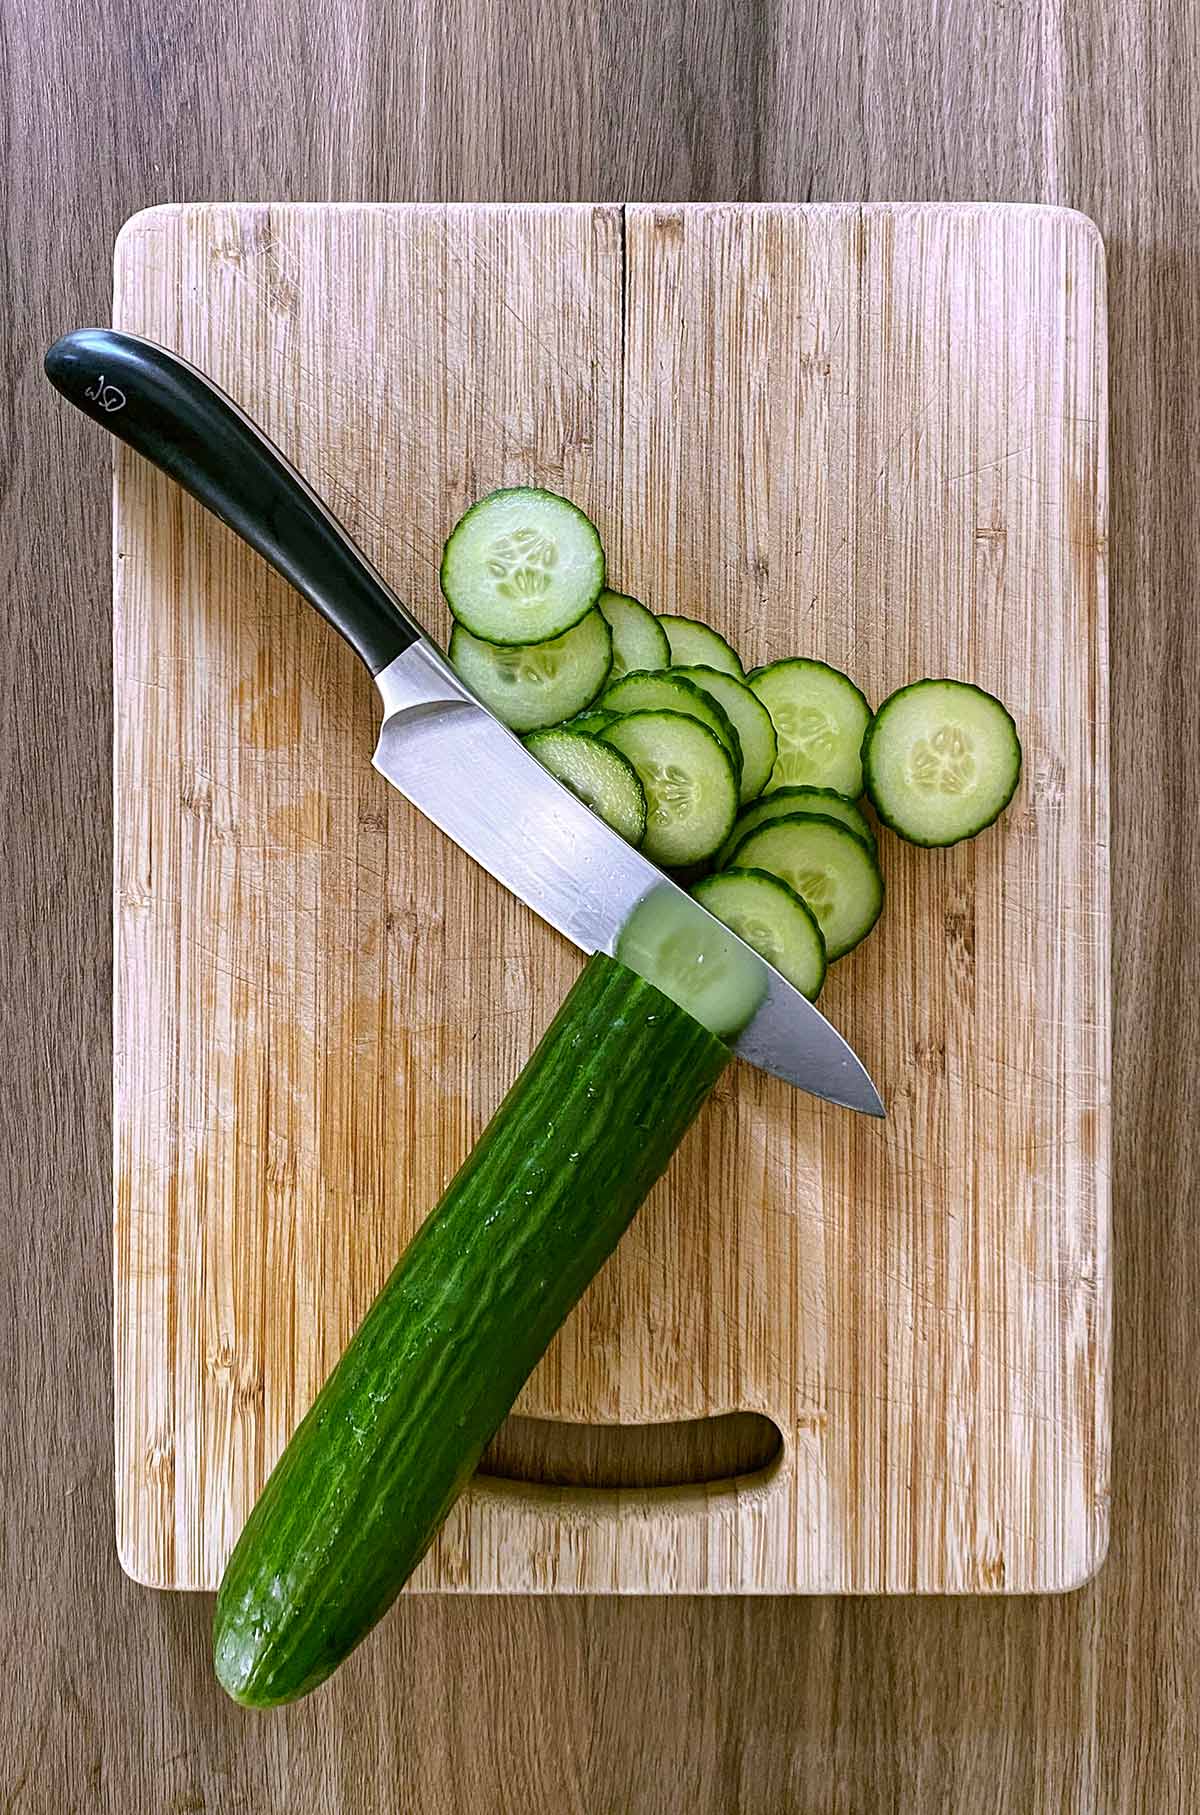 A chopping board and knife with a cucumber cut into slices.